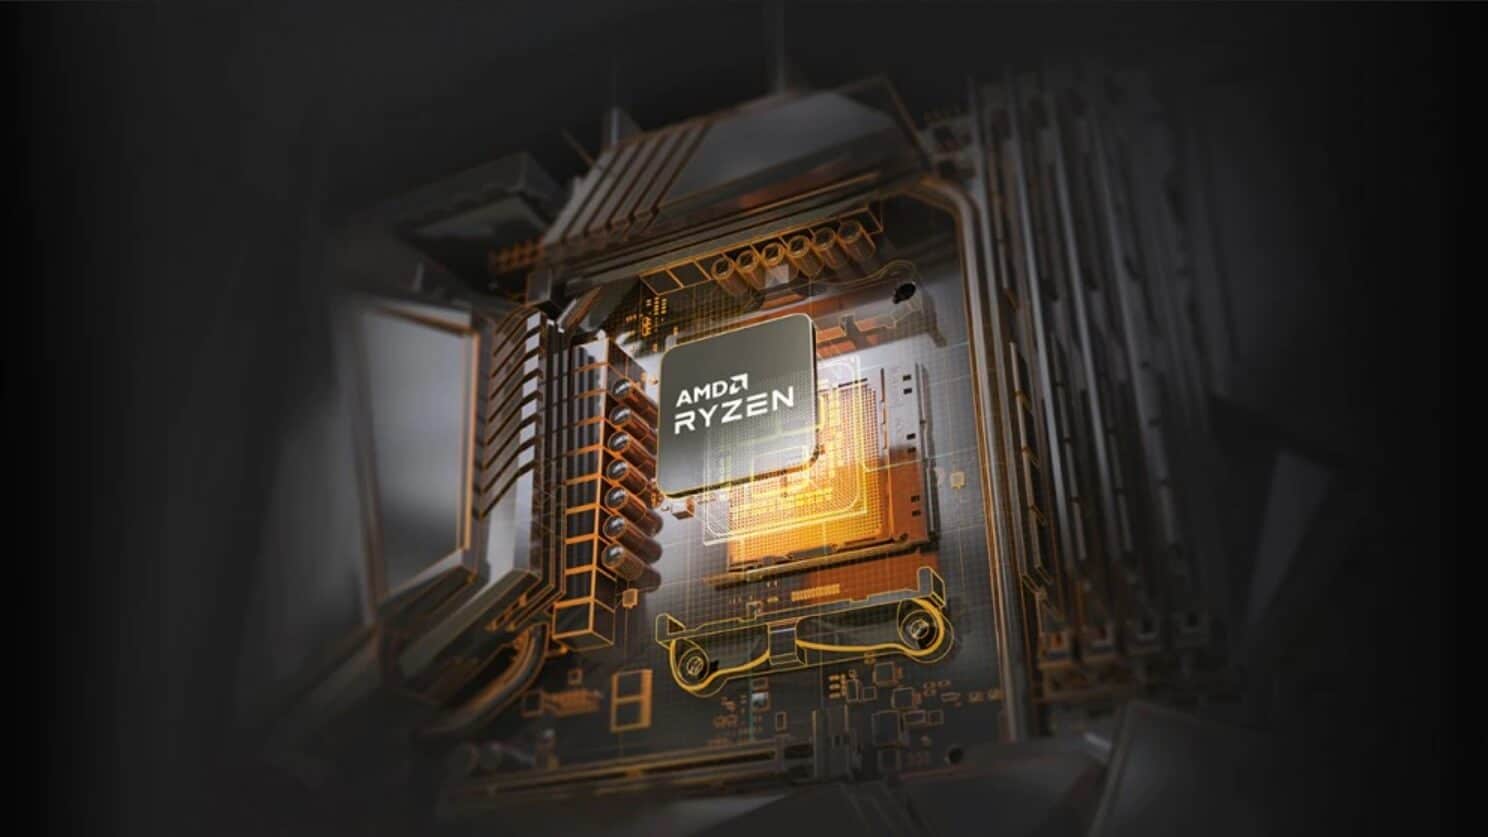 AMD to record the highest growth rate among chipmakers in 2021, at 65%